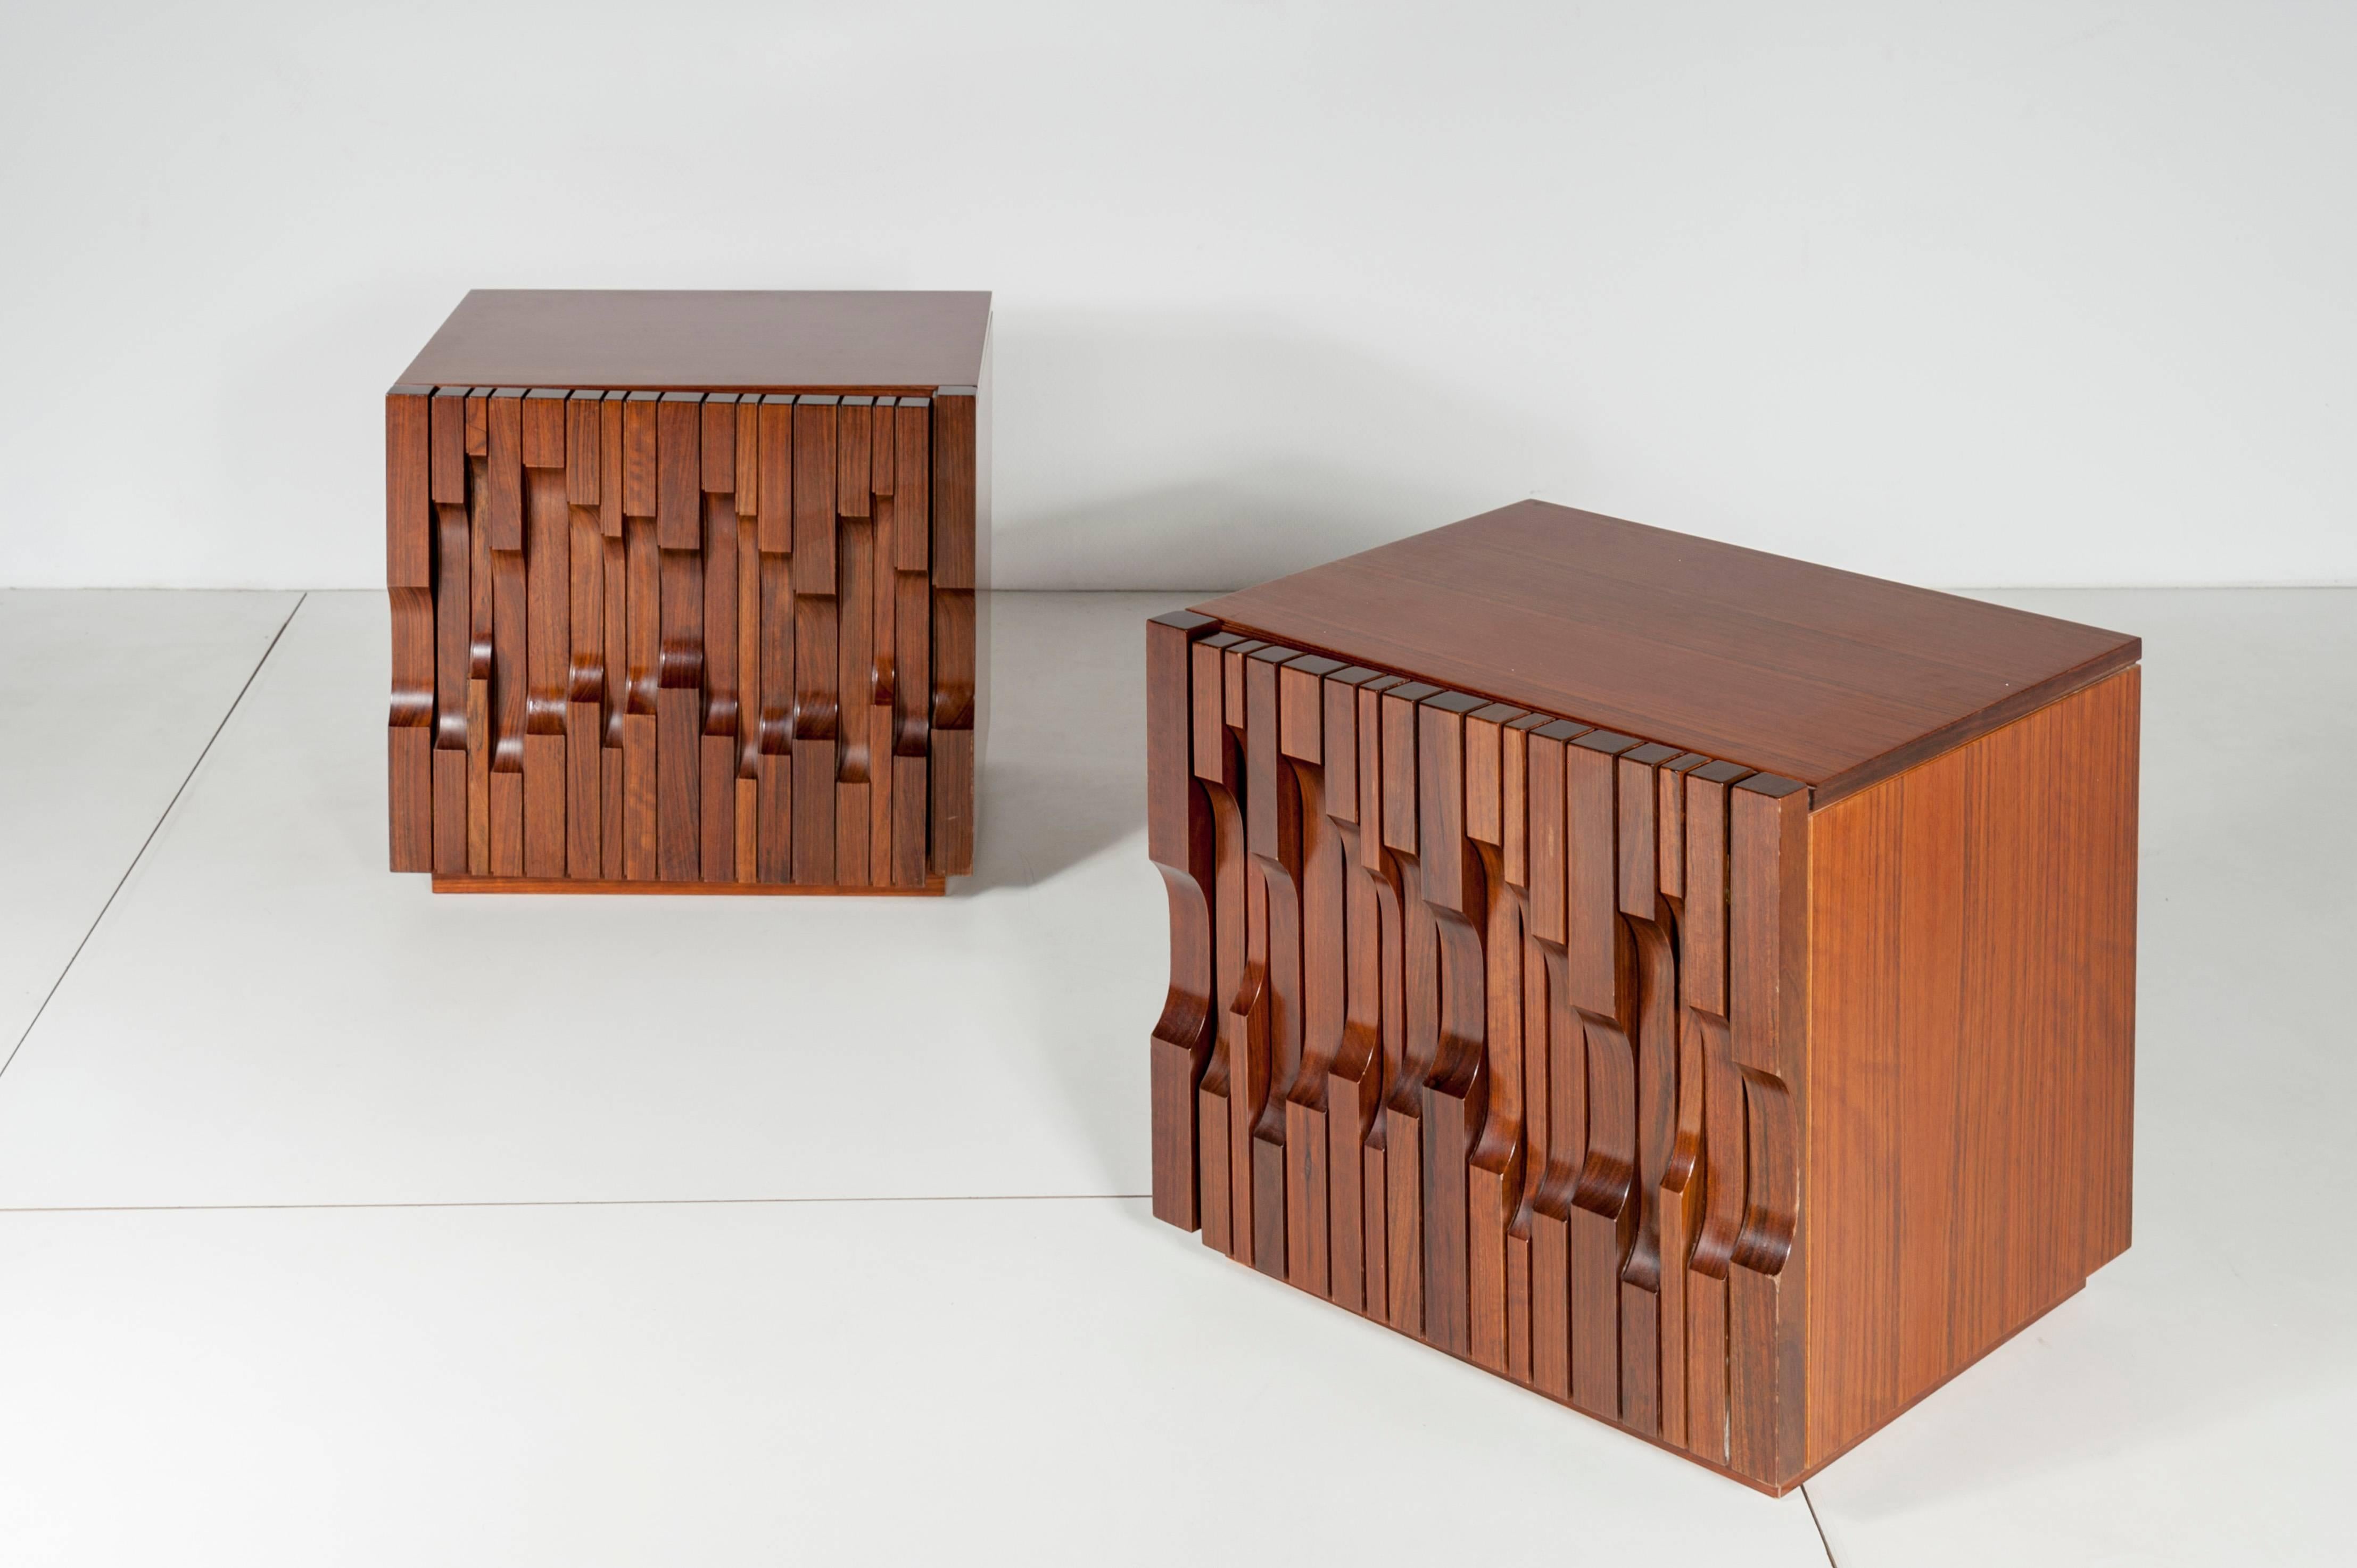 Pair of side table African walnut veneer “Norman” model, designed by Luciano Frigerio. Shelf system inside. Manufactured in Desio, Italy, circa 1972.
Luciano Frigerio (1929-1999) was the son of a family of healers who settled in 1899. The piano was